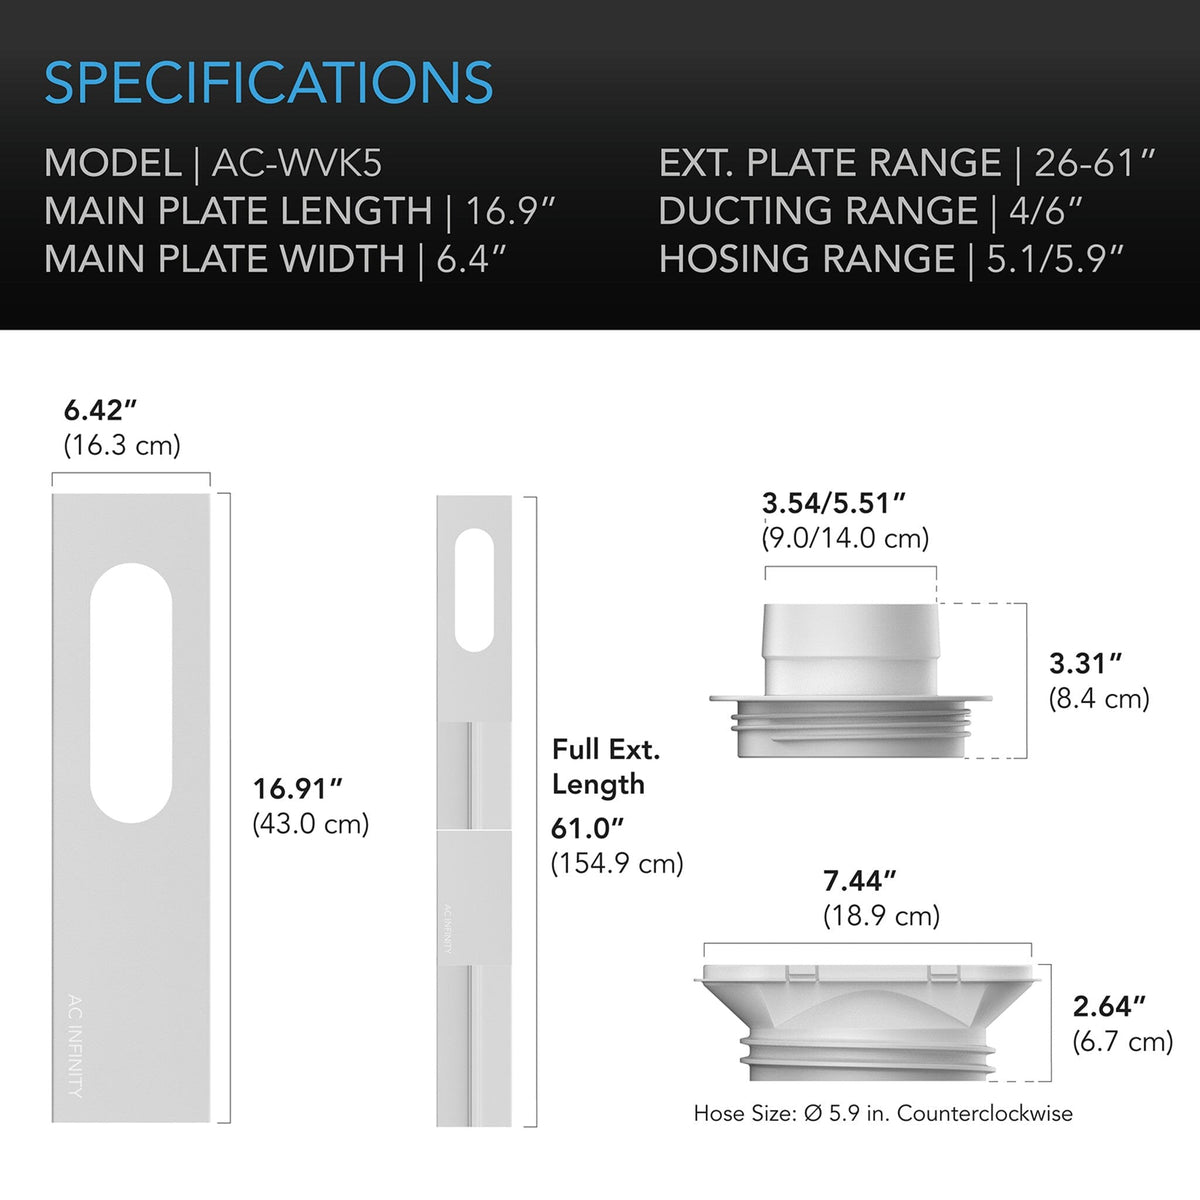 Window duct kit specifications